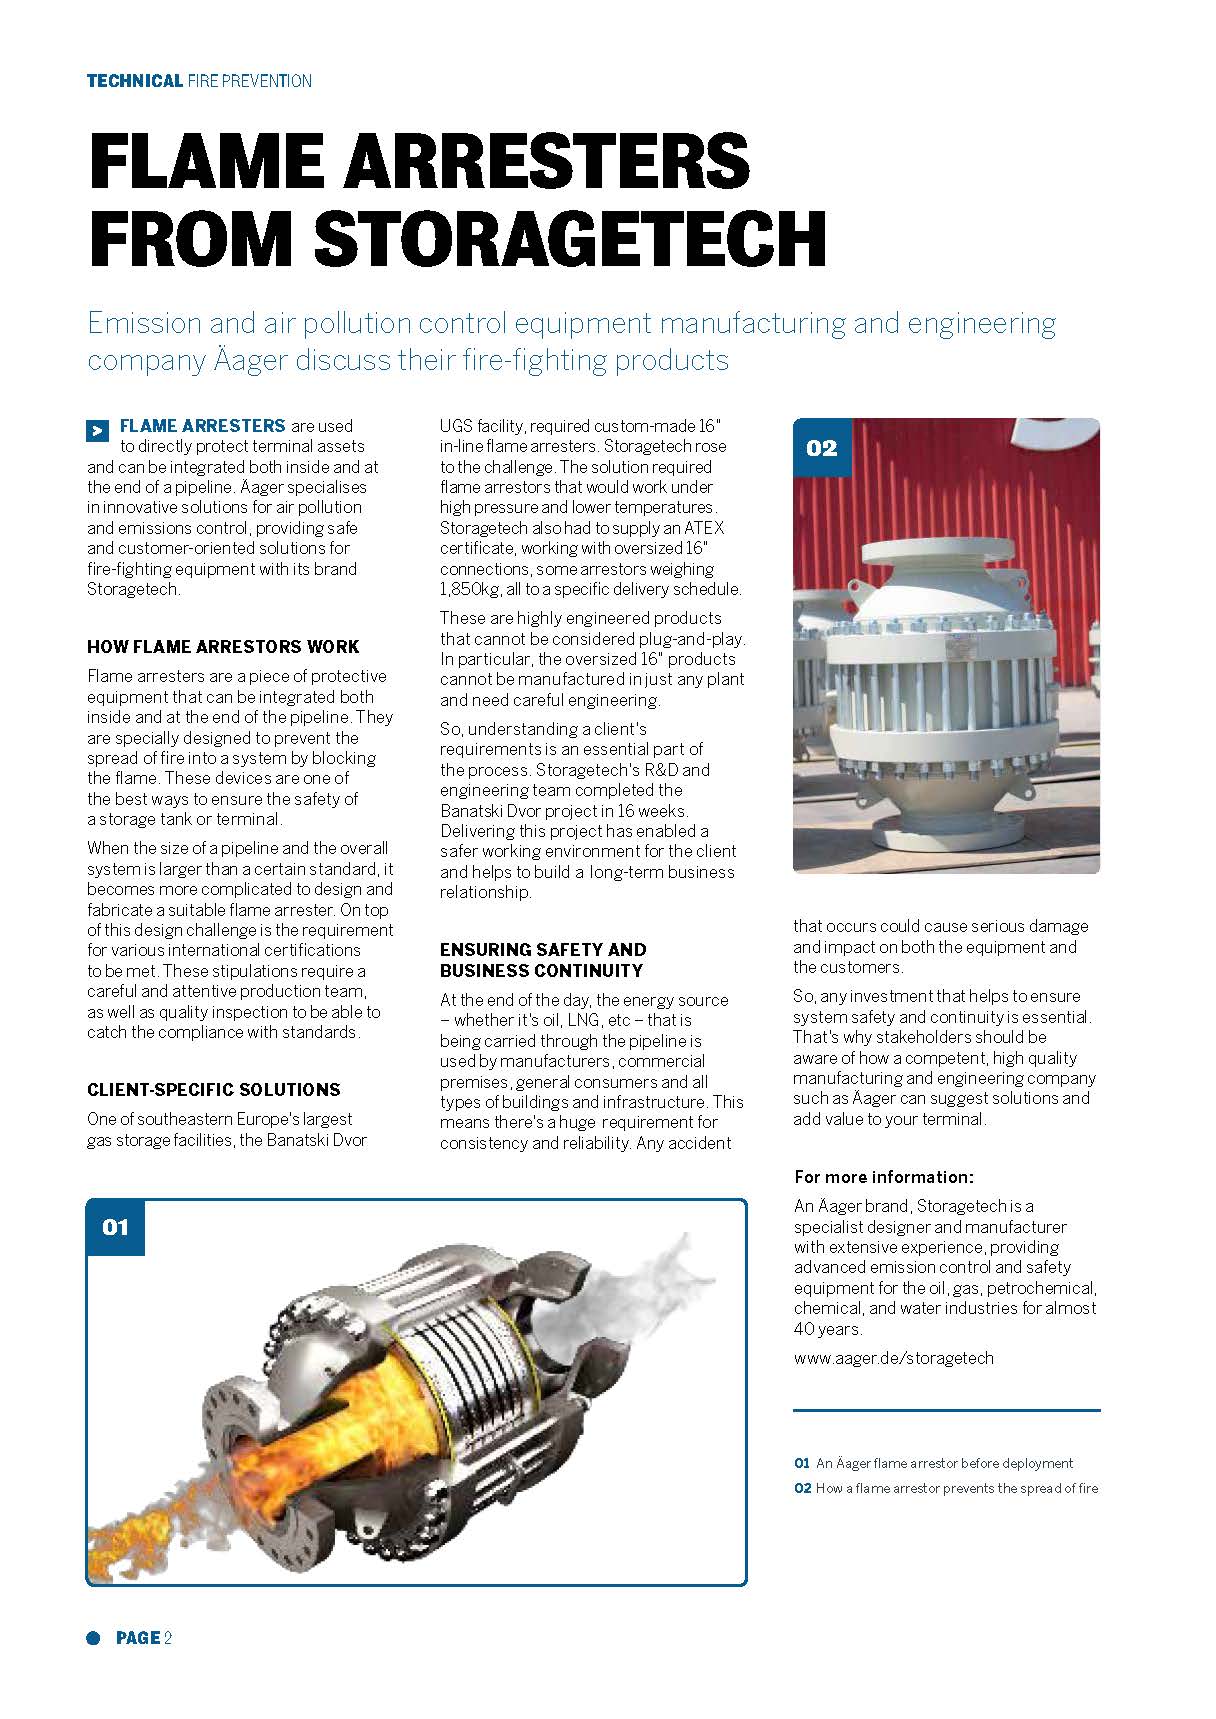 Customer-Oriented Flame Arresters from Storagetech – Tank Storage Magazine Article 40